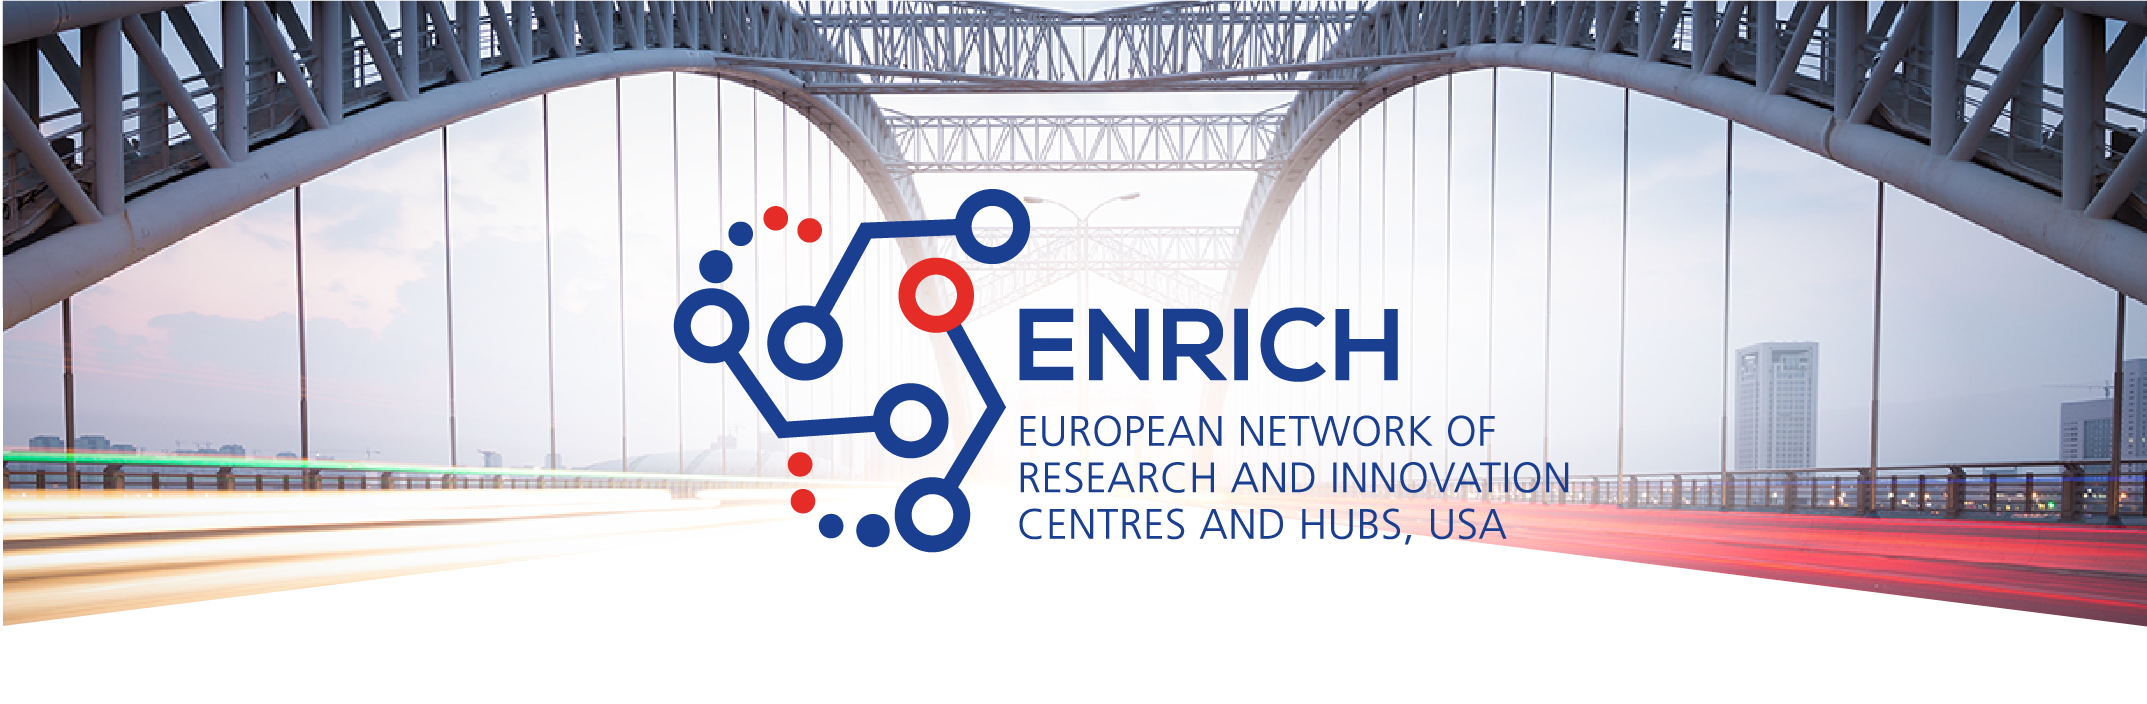 ENRICH IN THE USA Smart City Bootcamp